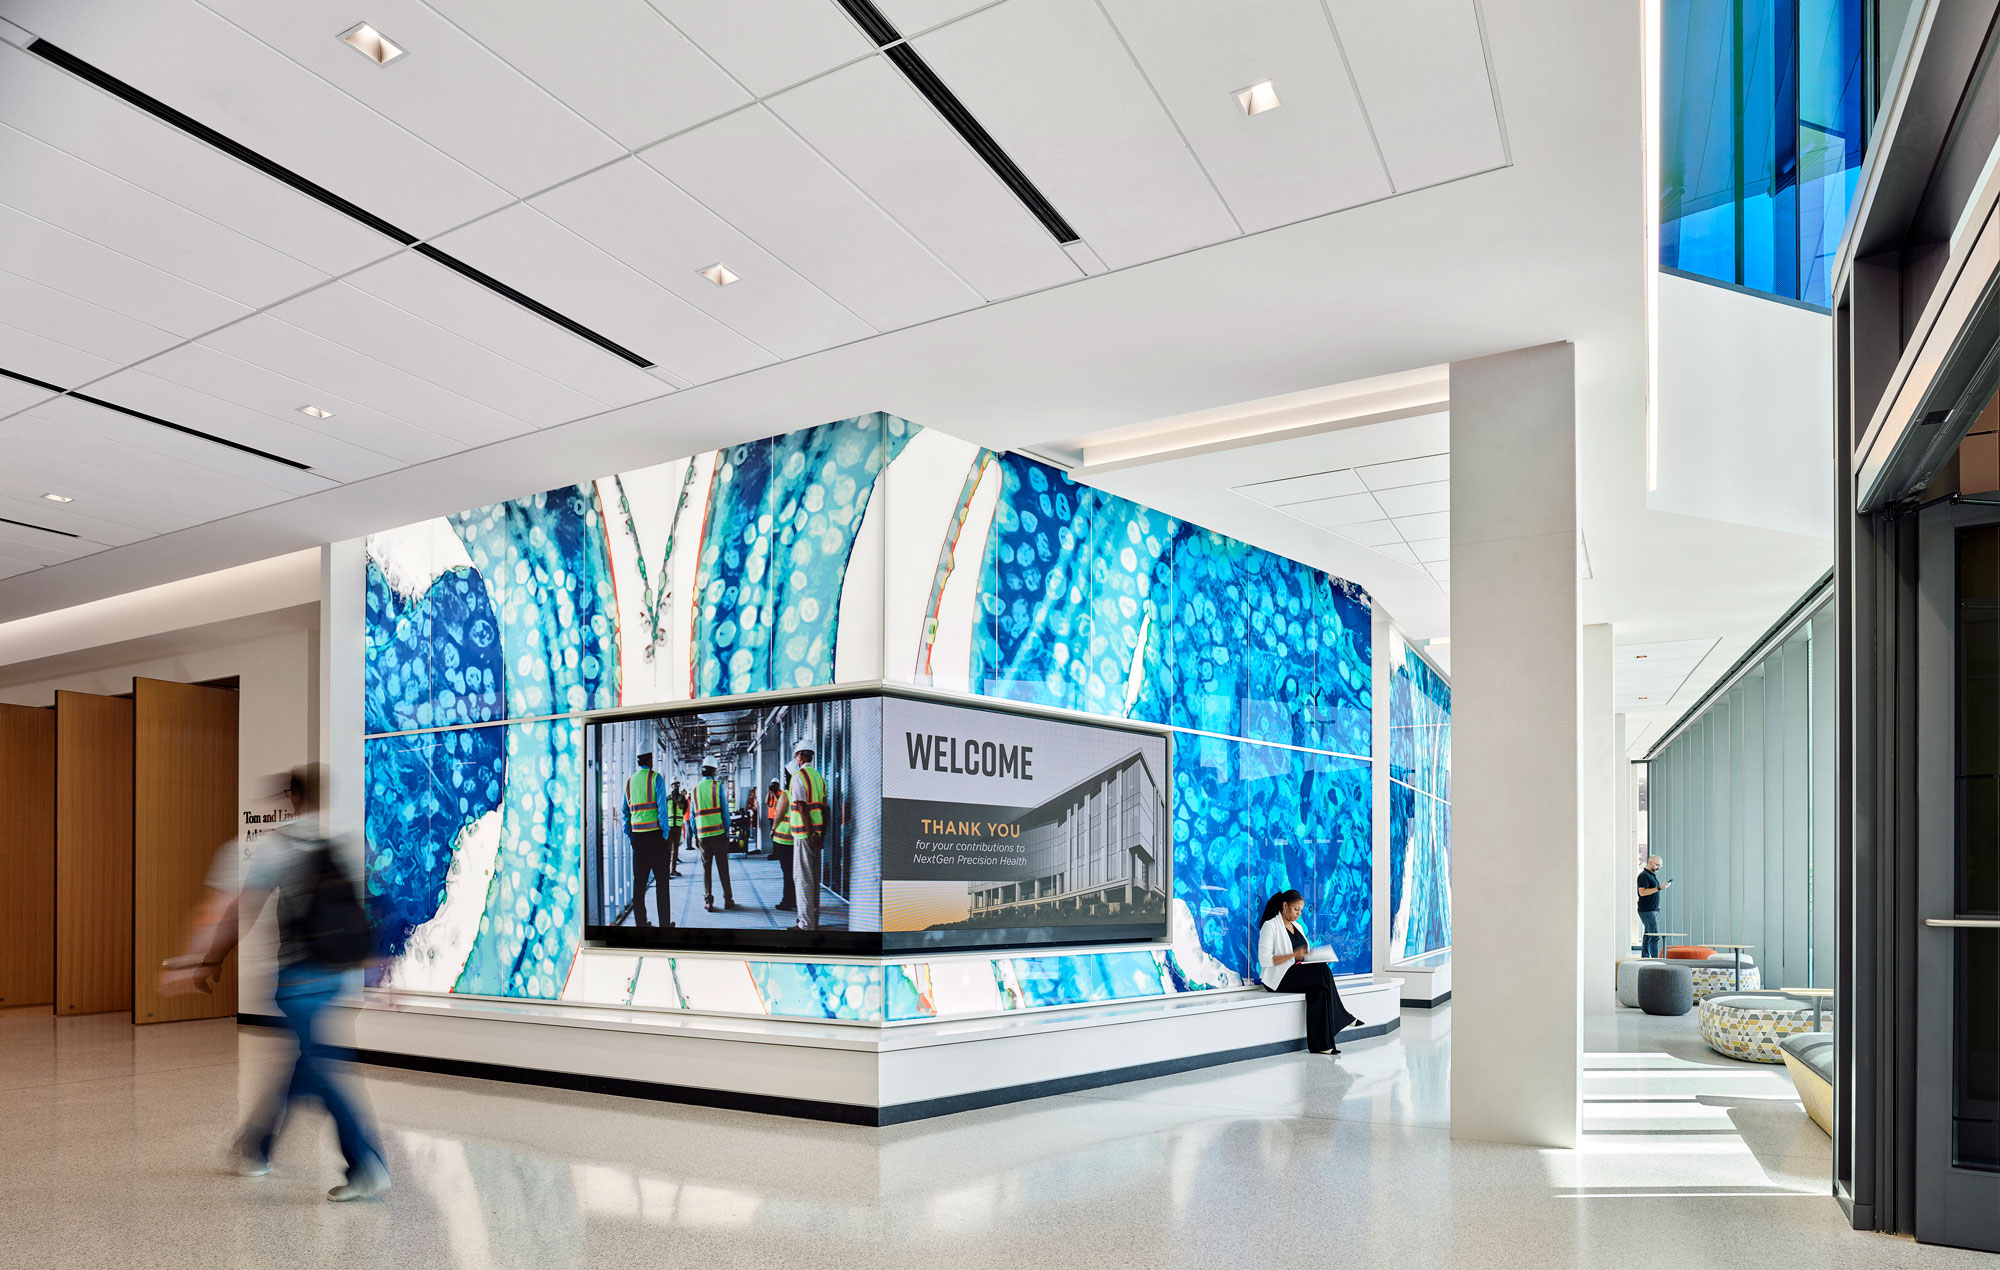 Bendheim TurnKey Fusion glass cladding system in a lobby.